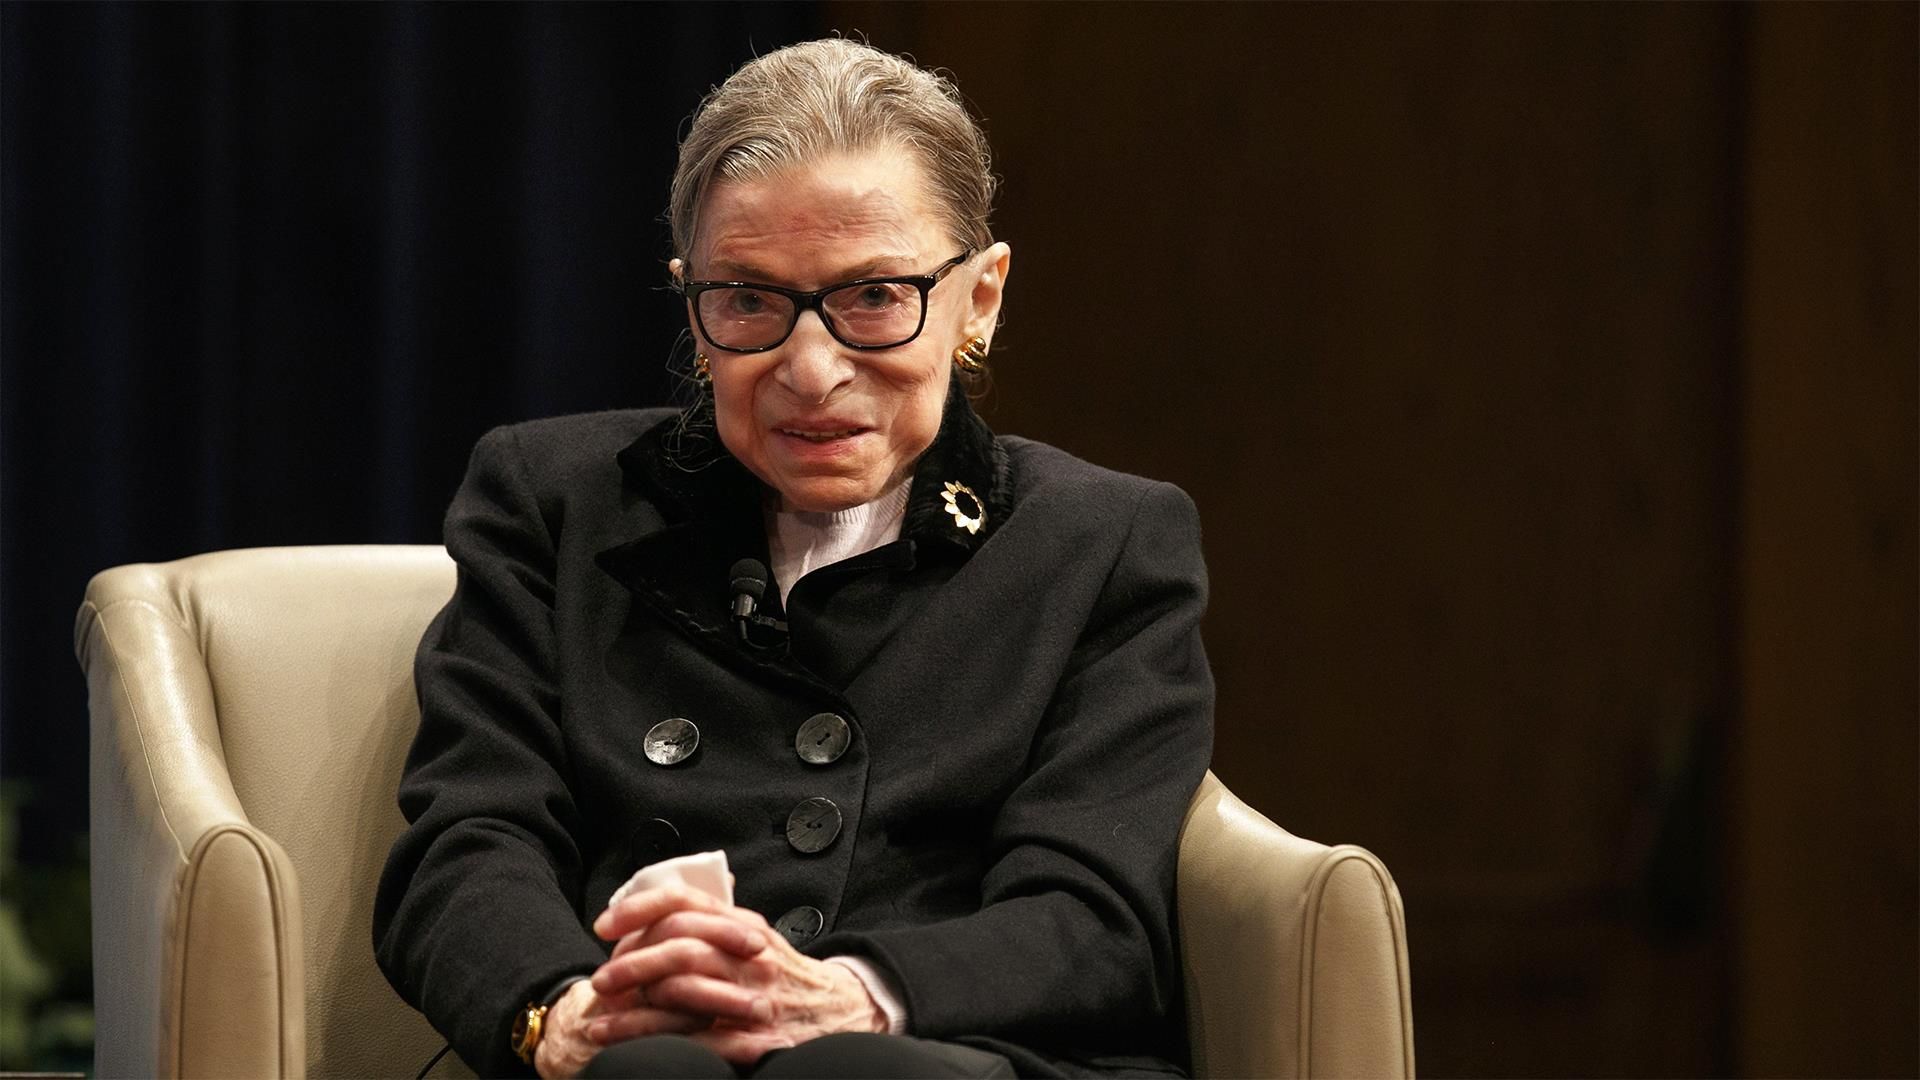 Justice Ruth Bader Ginsburg hospitalized for gallbladder condition